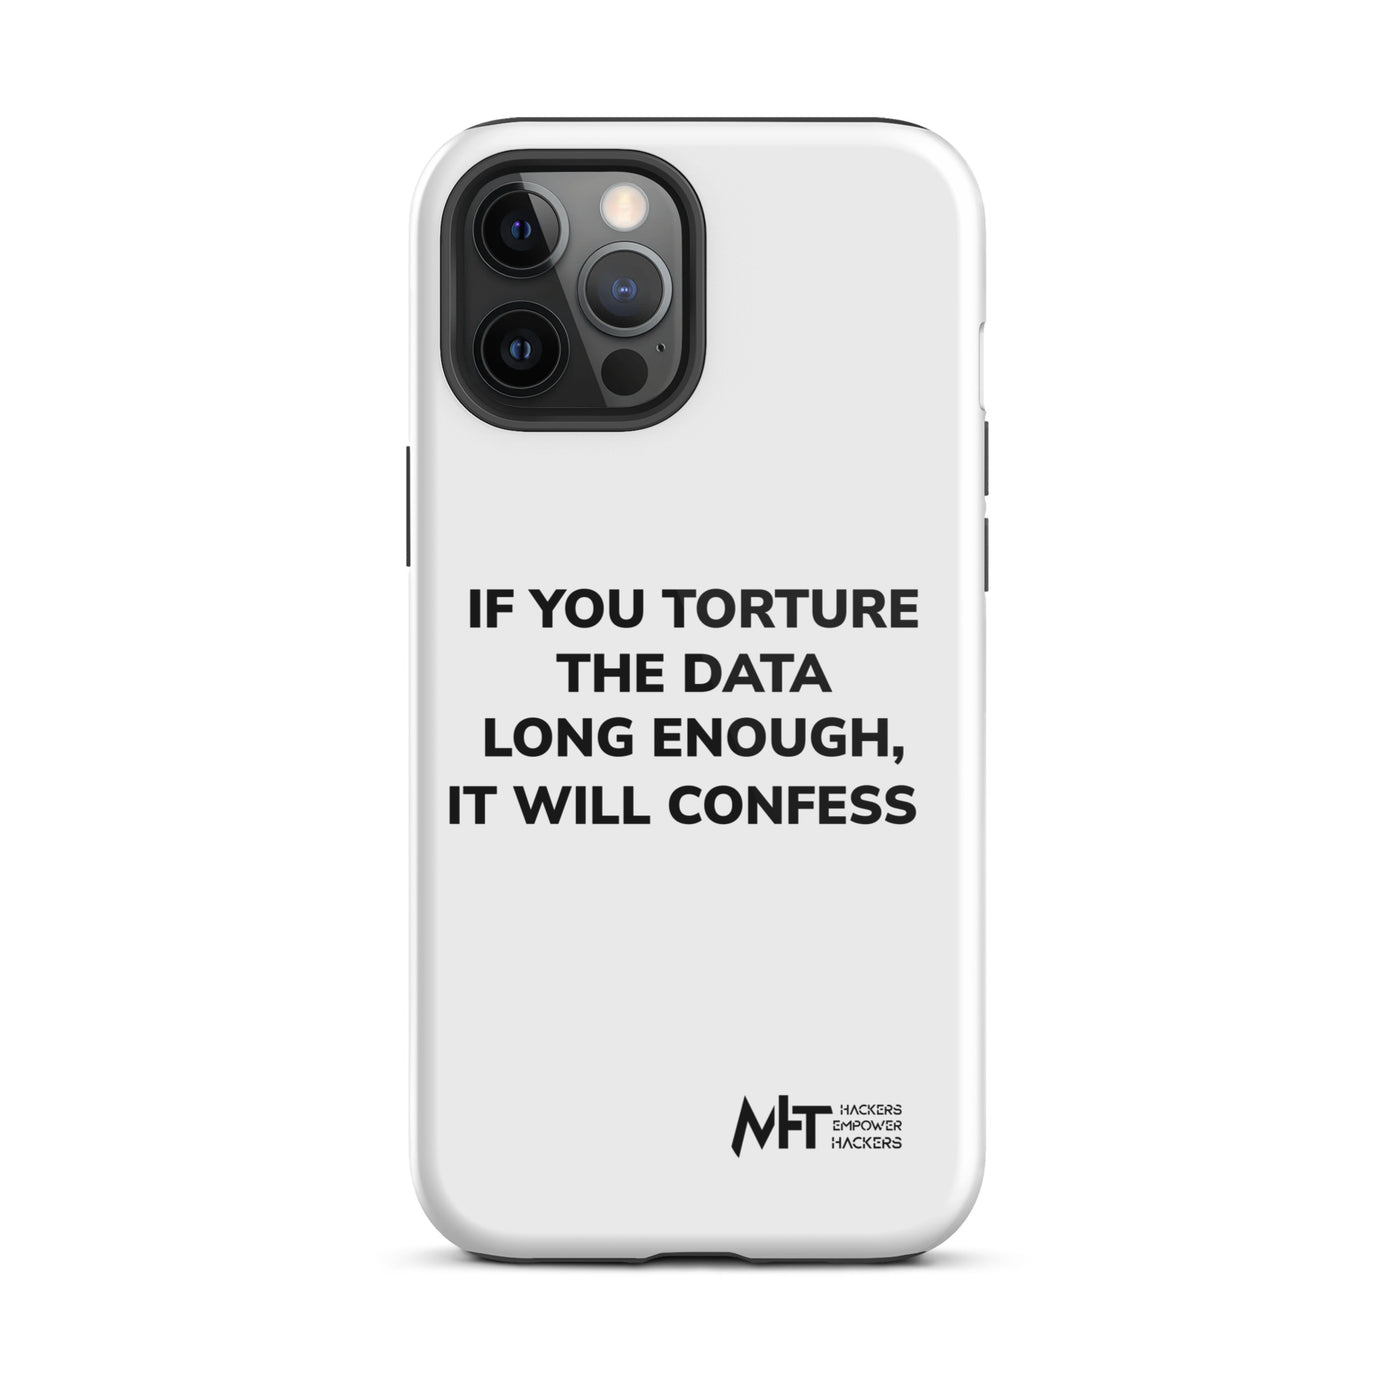 If you torture the data - Tough iPhone case